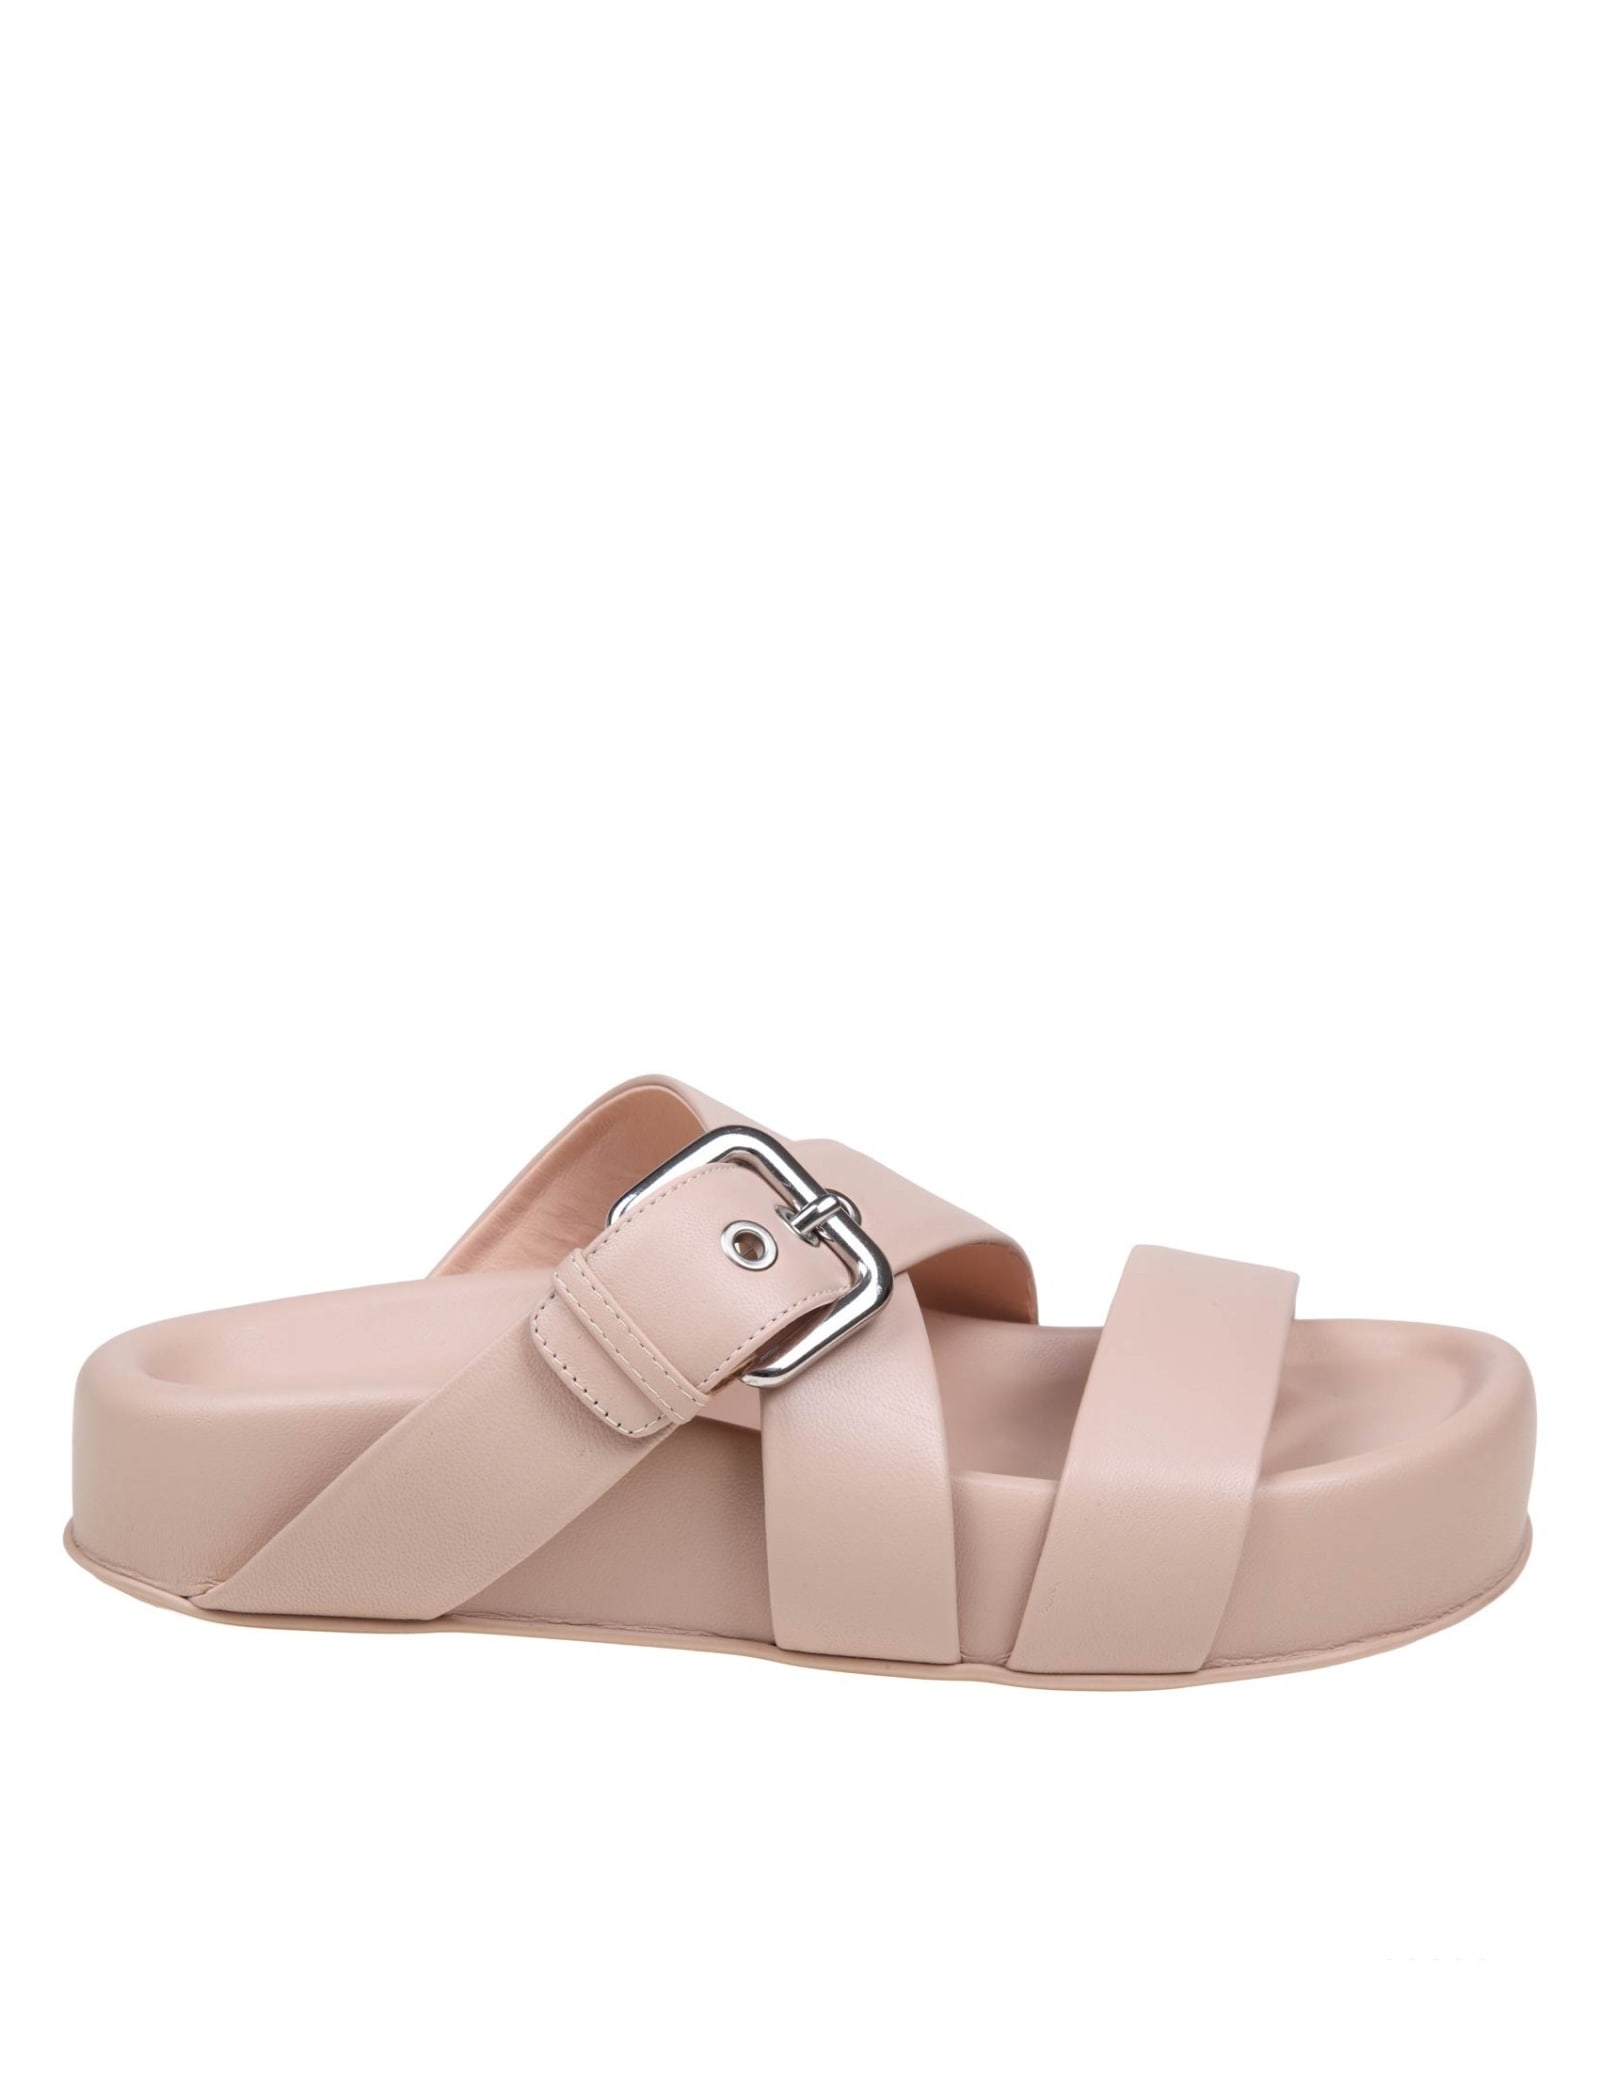 Jane Slides In Nude Leather